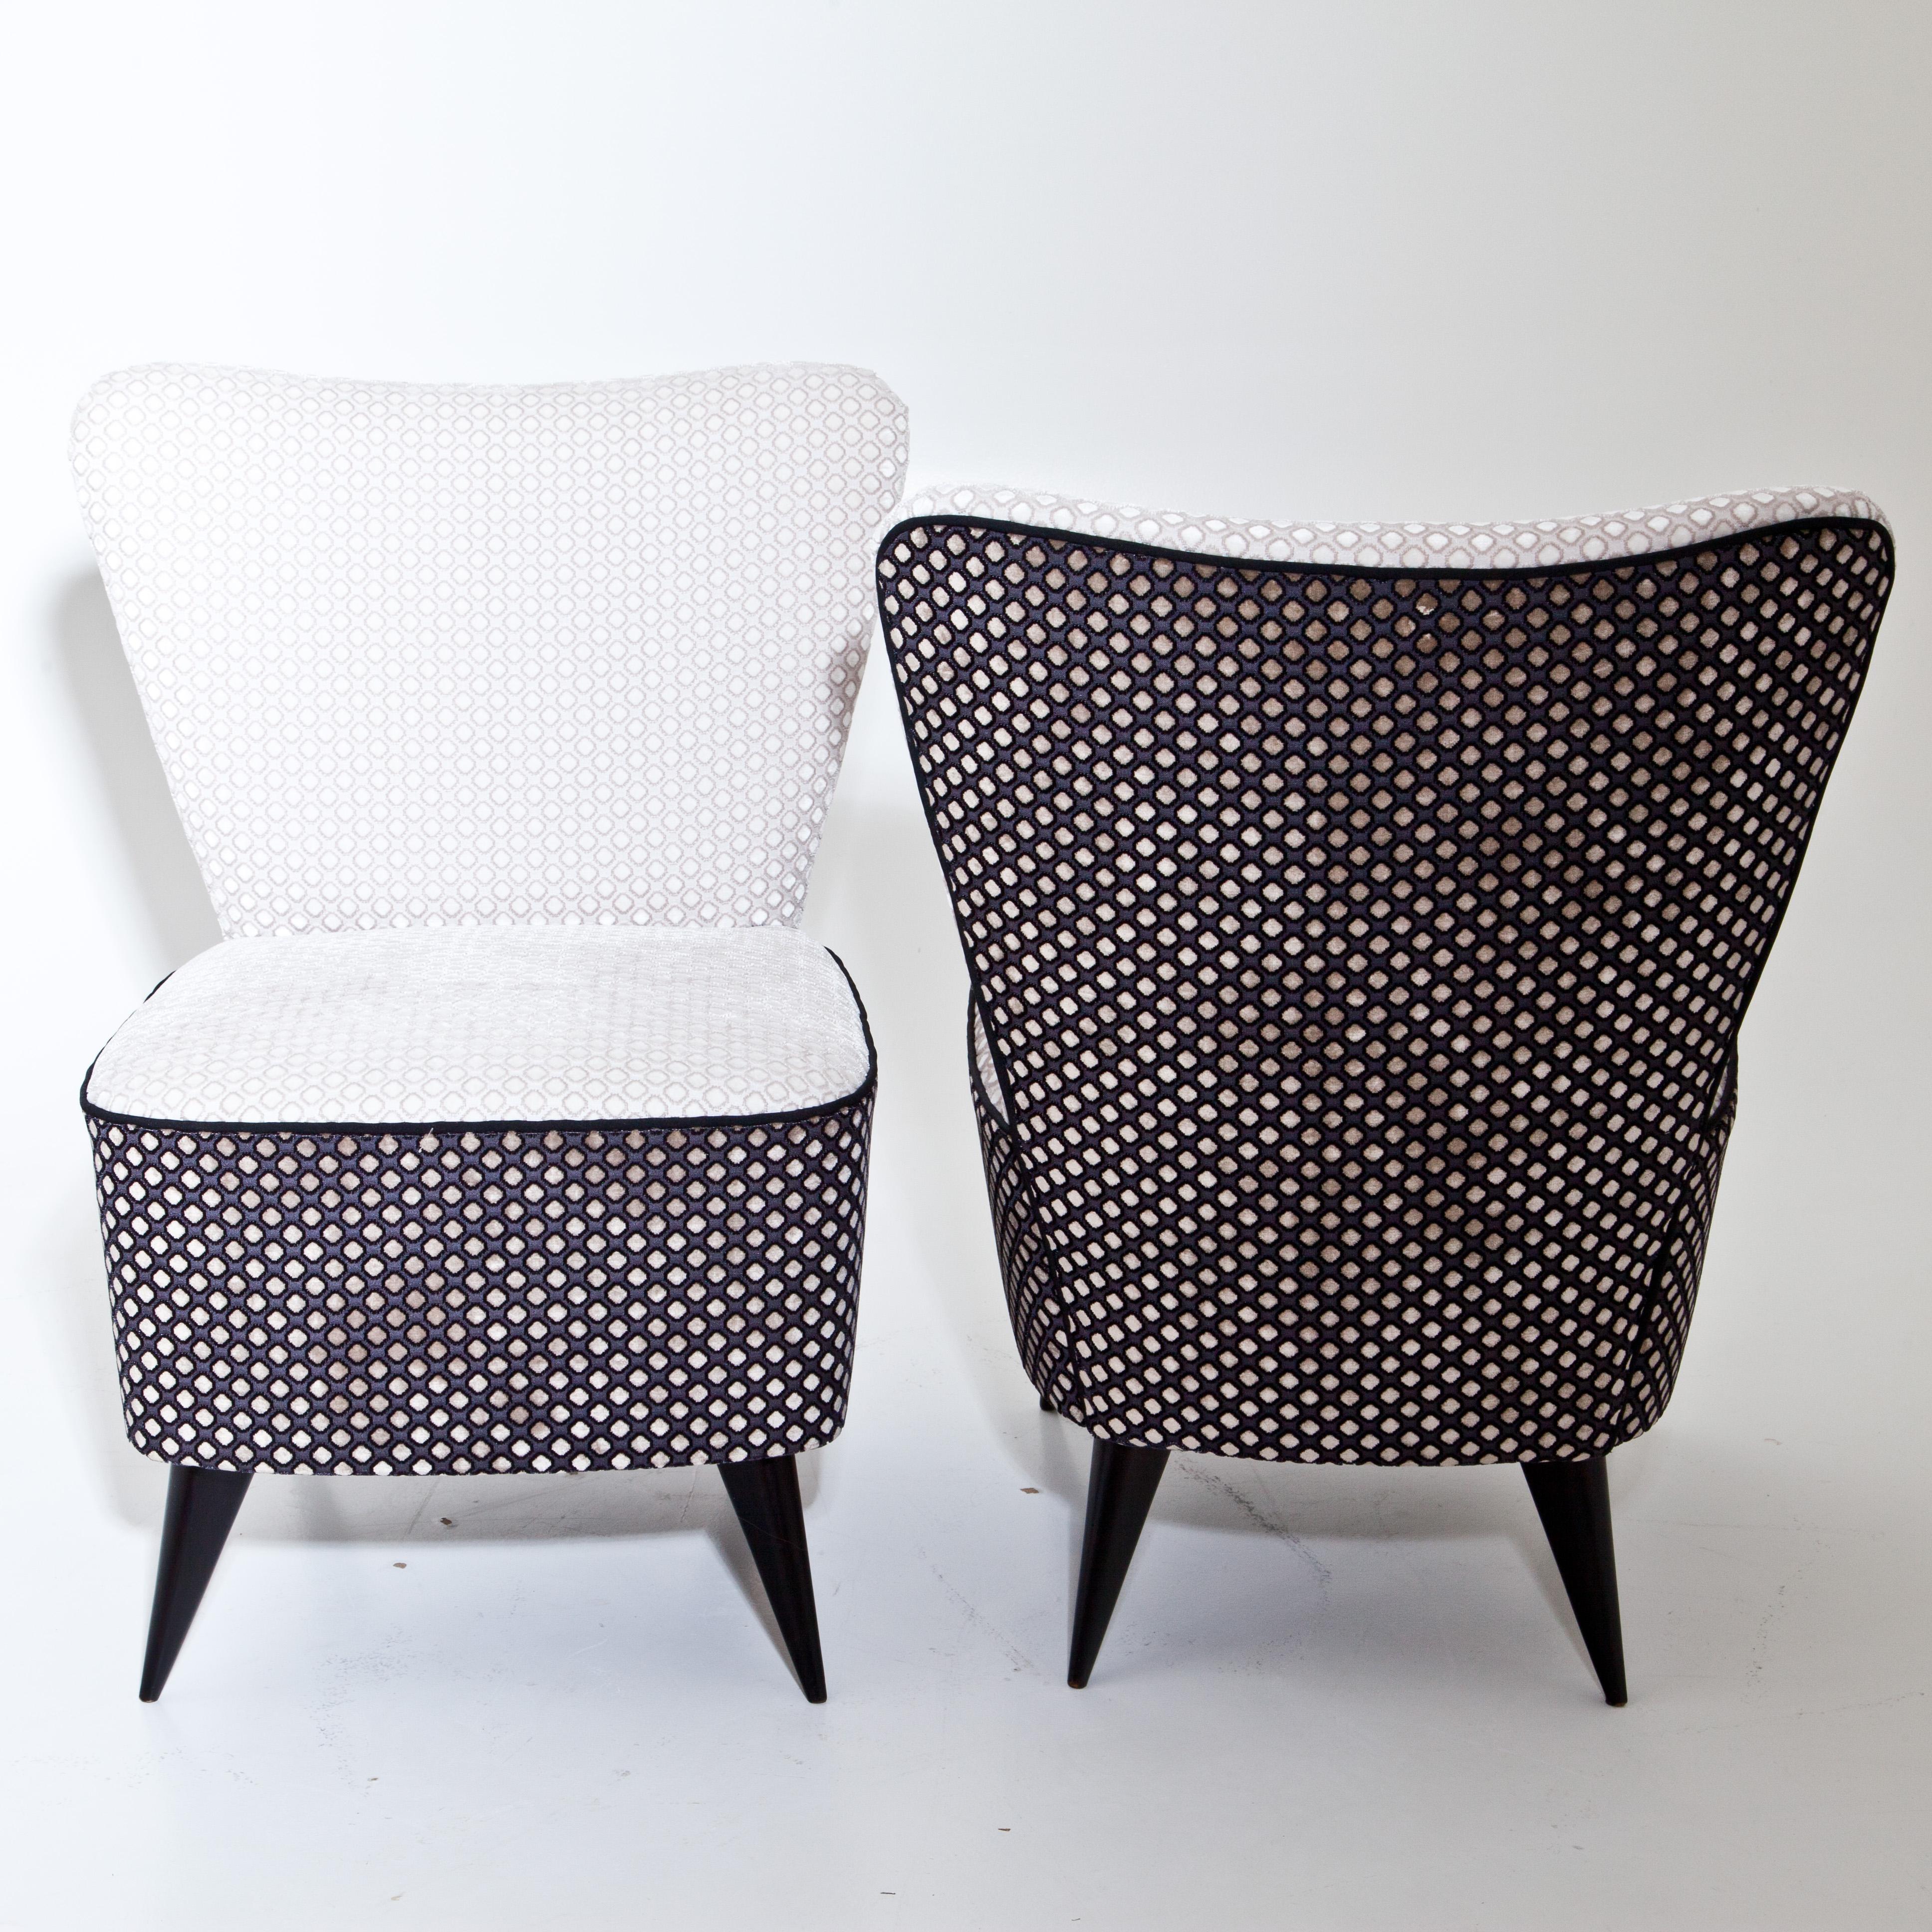 Mid-20th Century Pair of Midcentury Design Reupholstered Slipper Chairs, Italy, 1950s